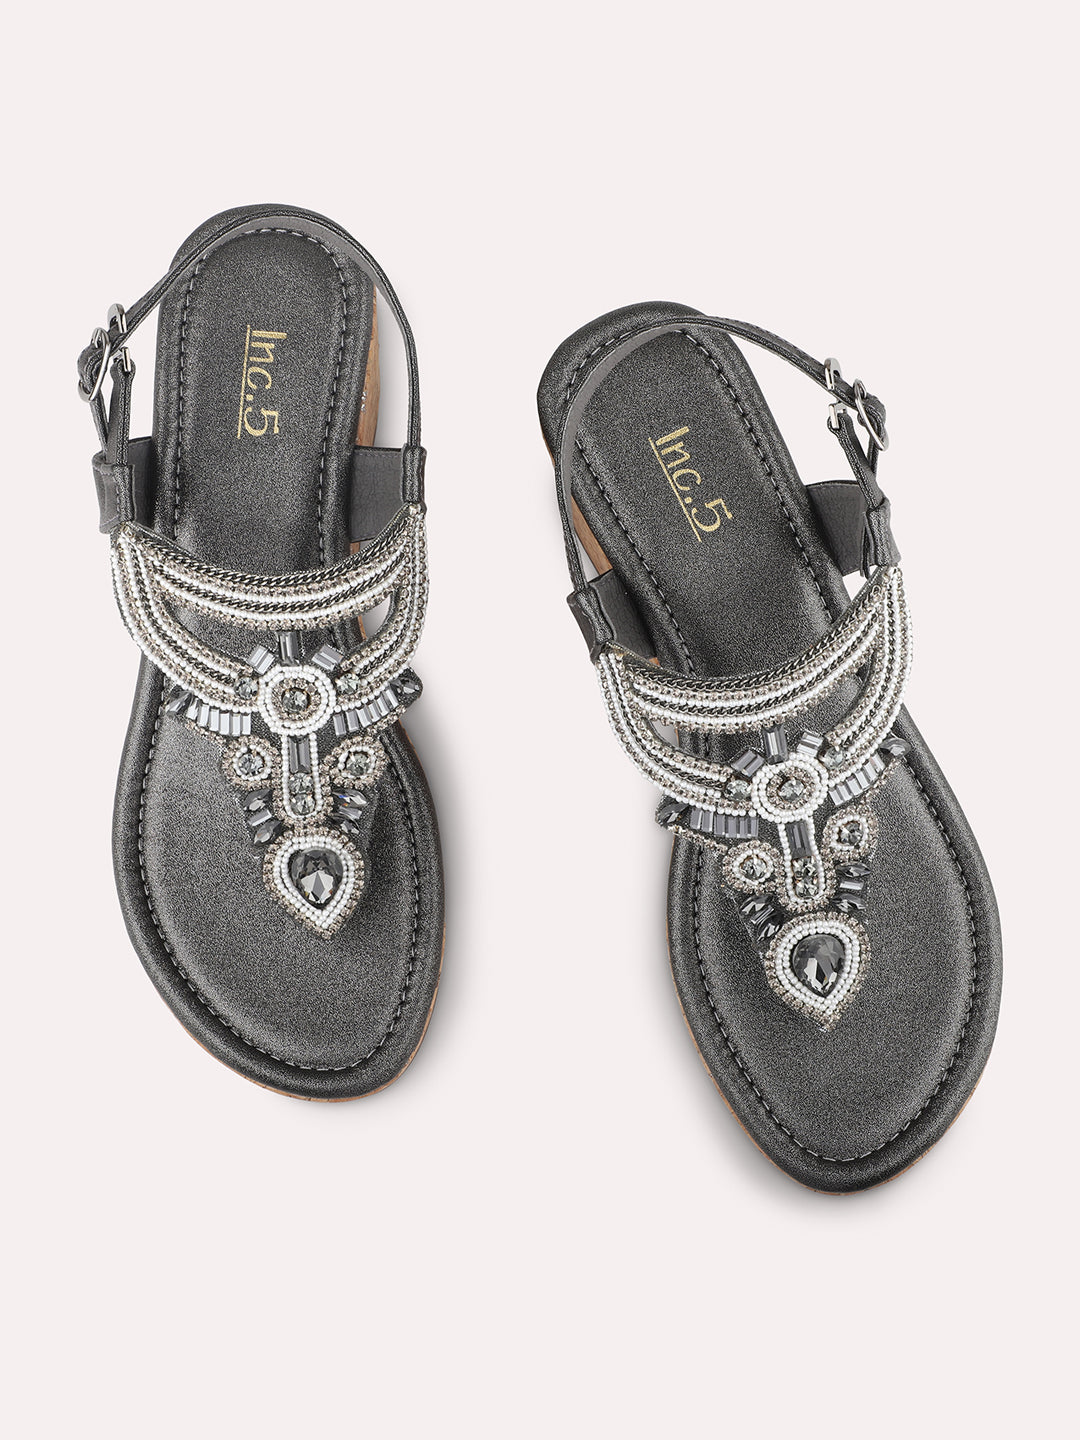 Women Pewter Ethnic Embellished Wedges with Buckle Closure